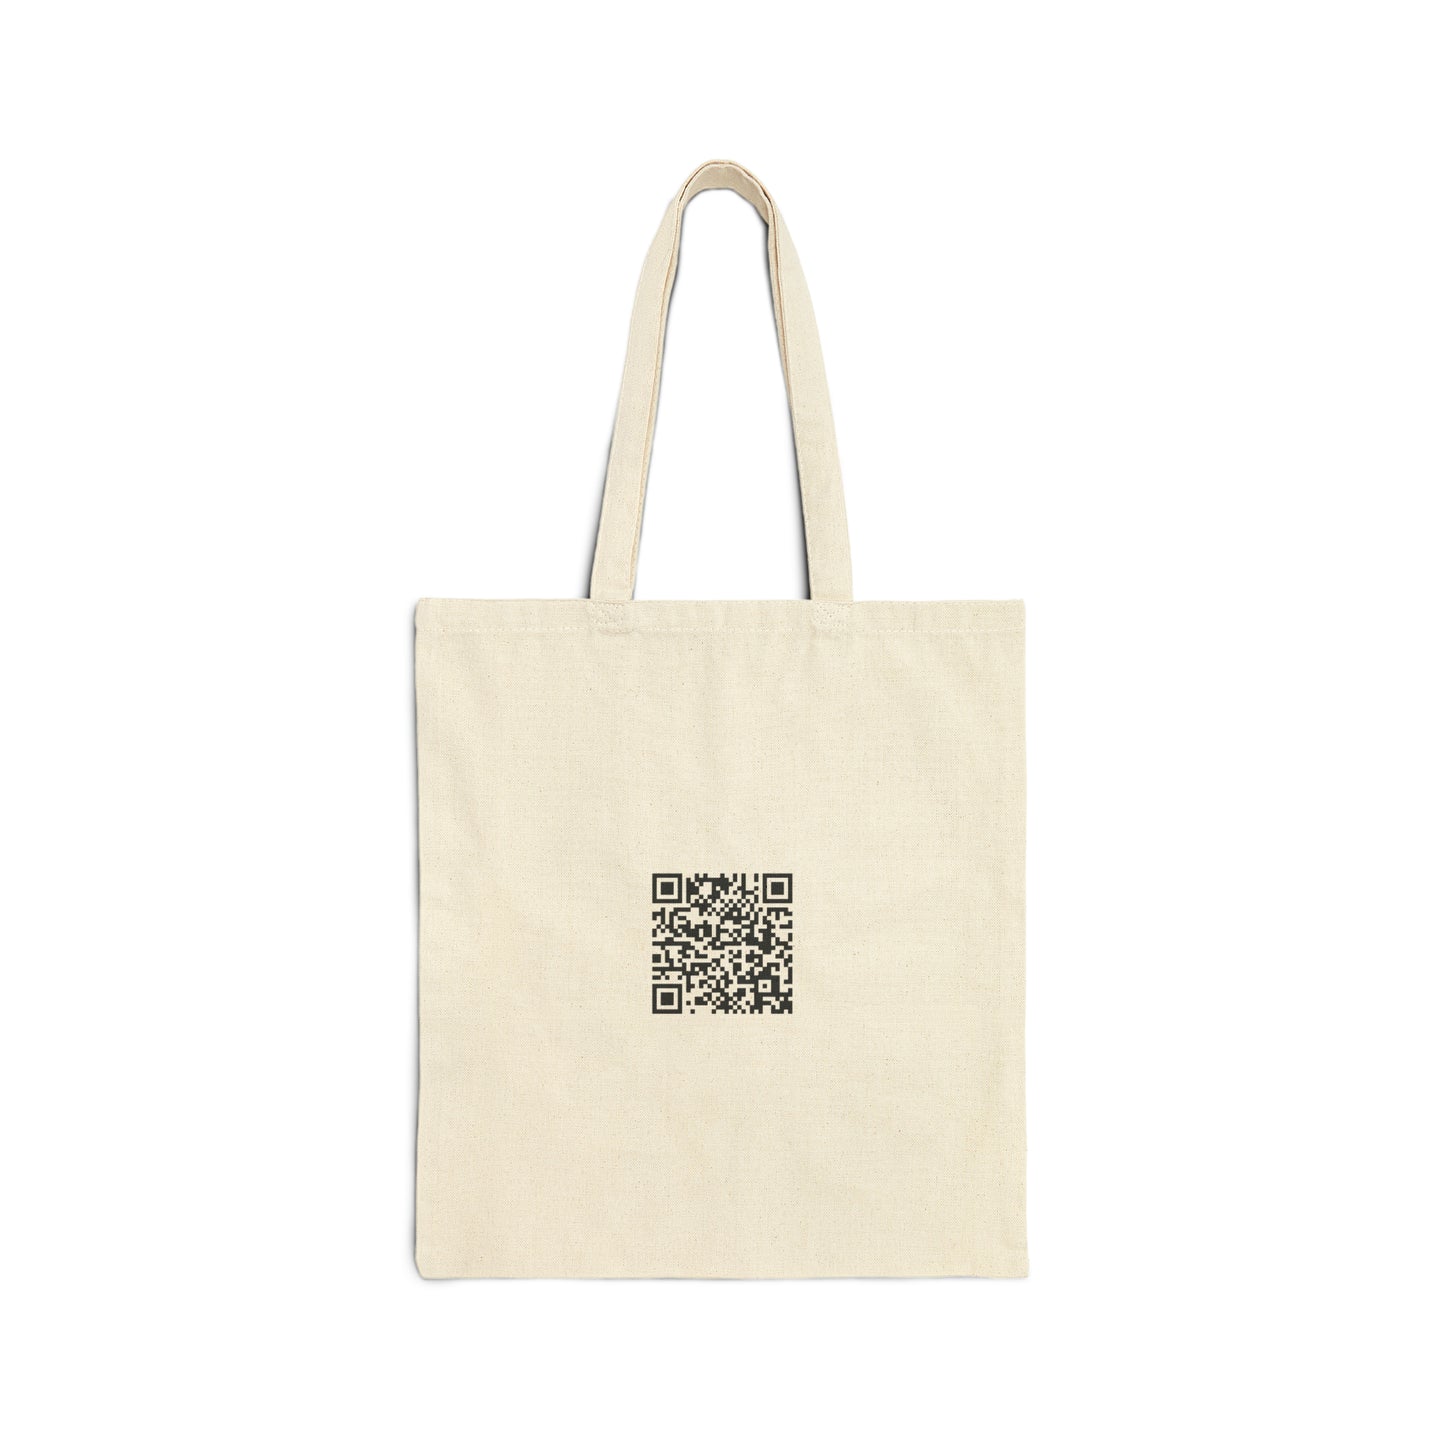 The Other Side Of Silence - Cotton Canvas Tote Bag